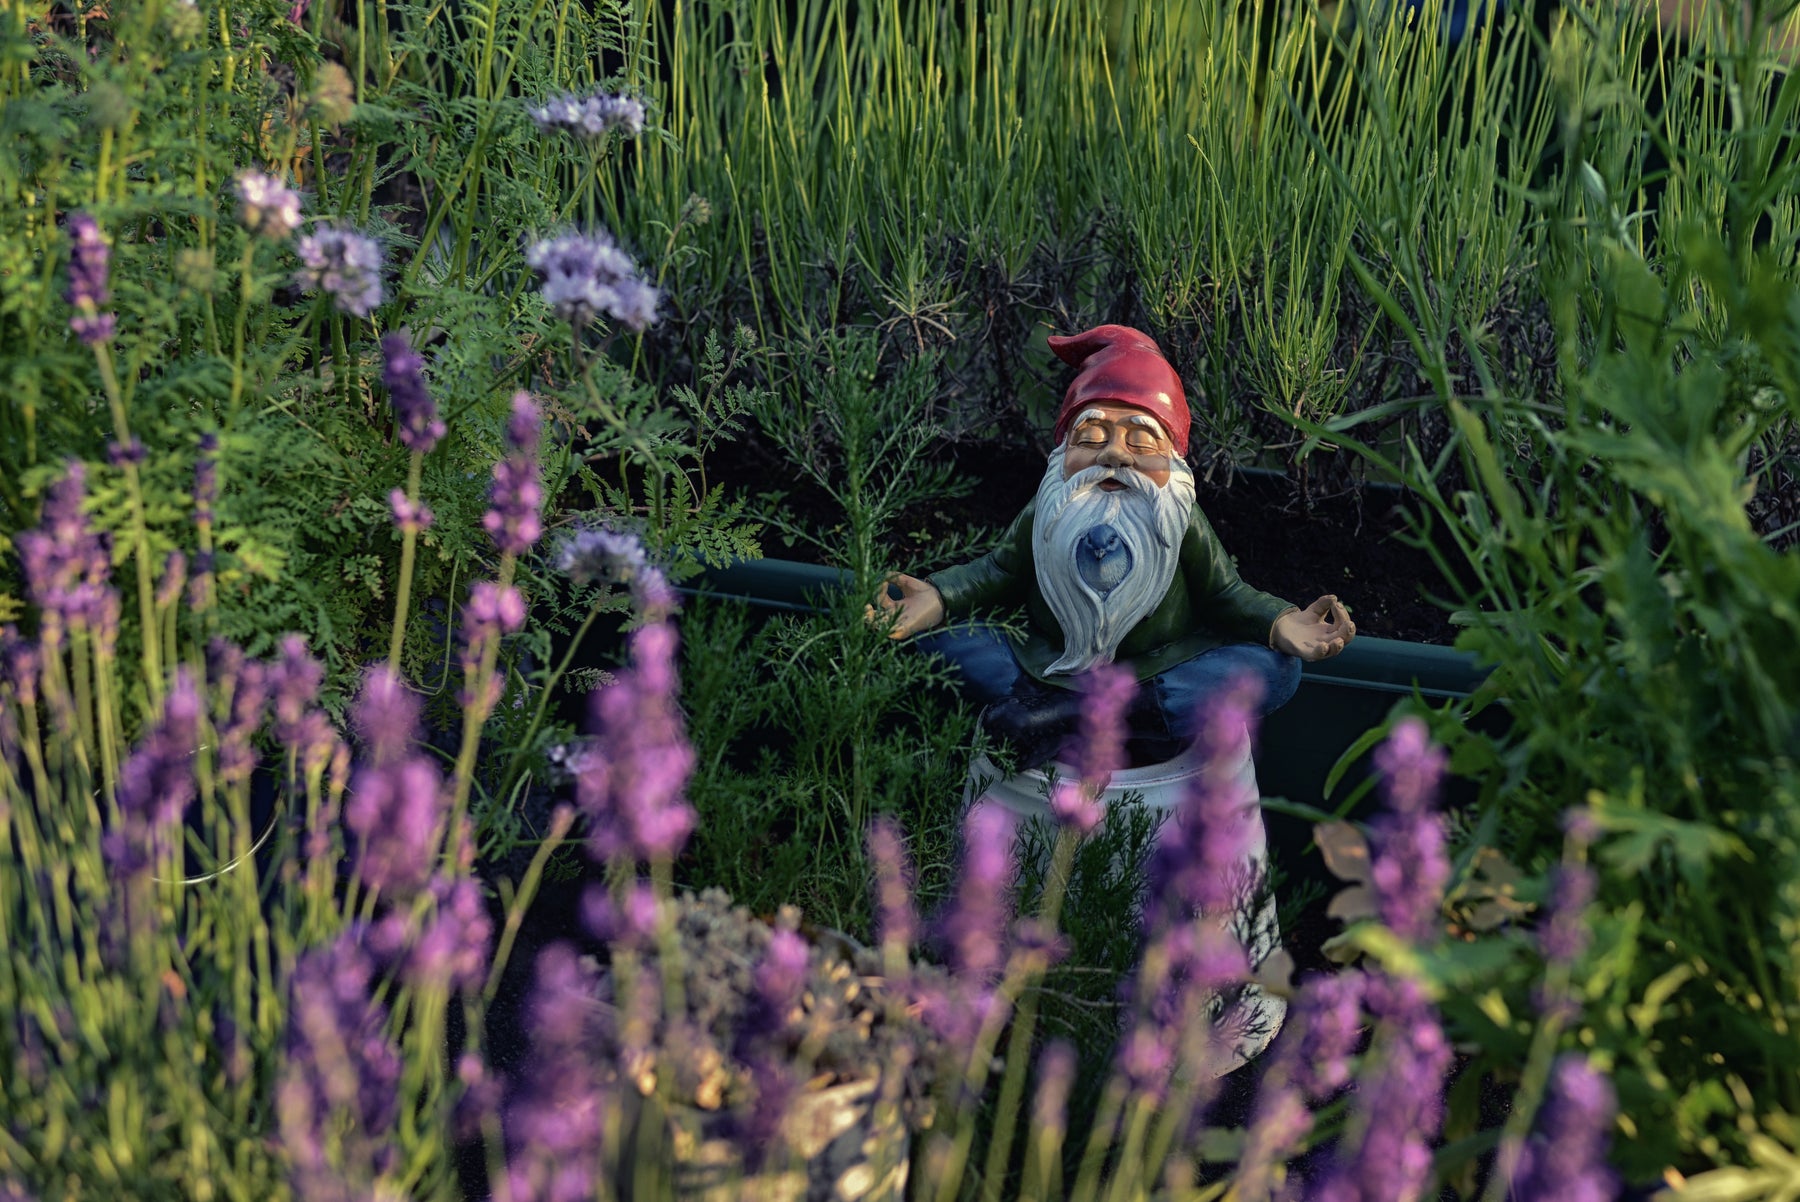 Gnome statue meditating in a garden with long green grass in the background and purple wildflowers in foreground